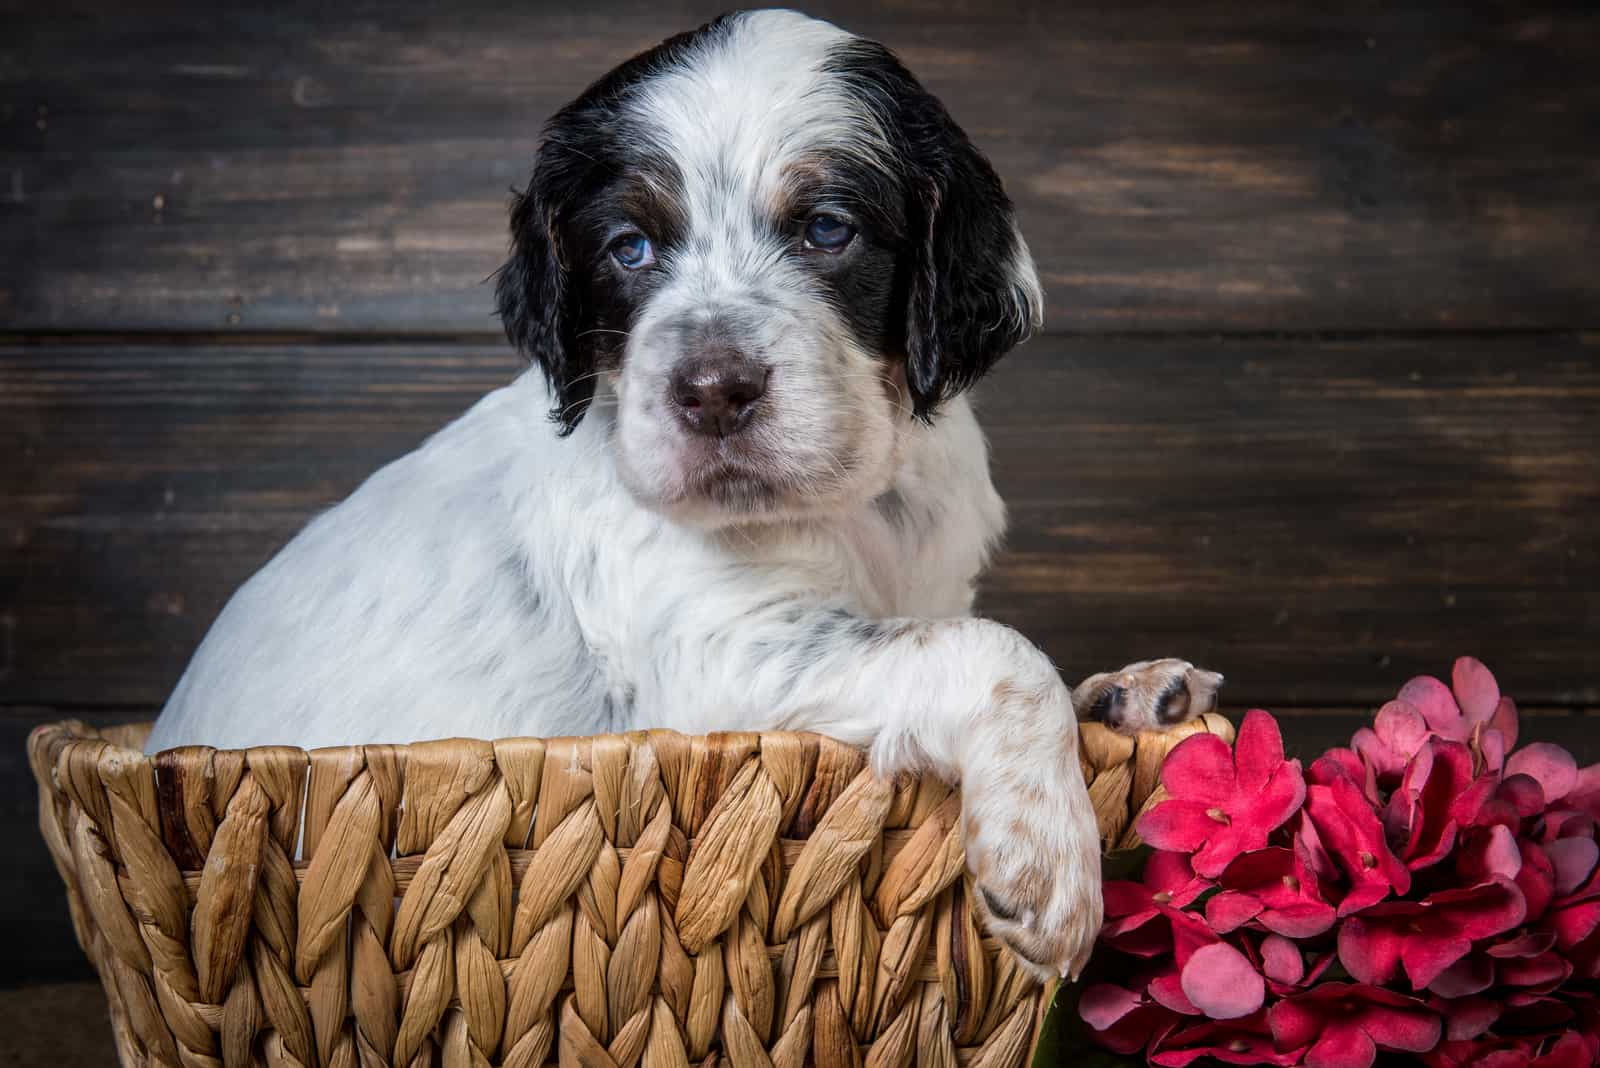 Cute English Setter puppy dog with blue eyes